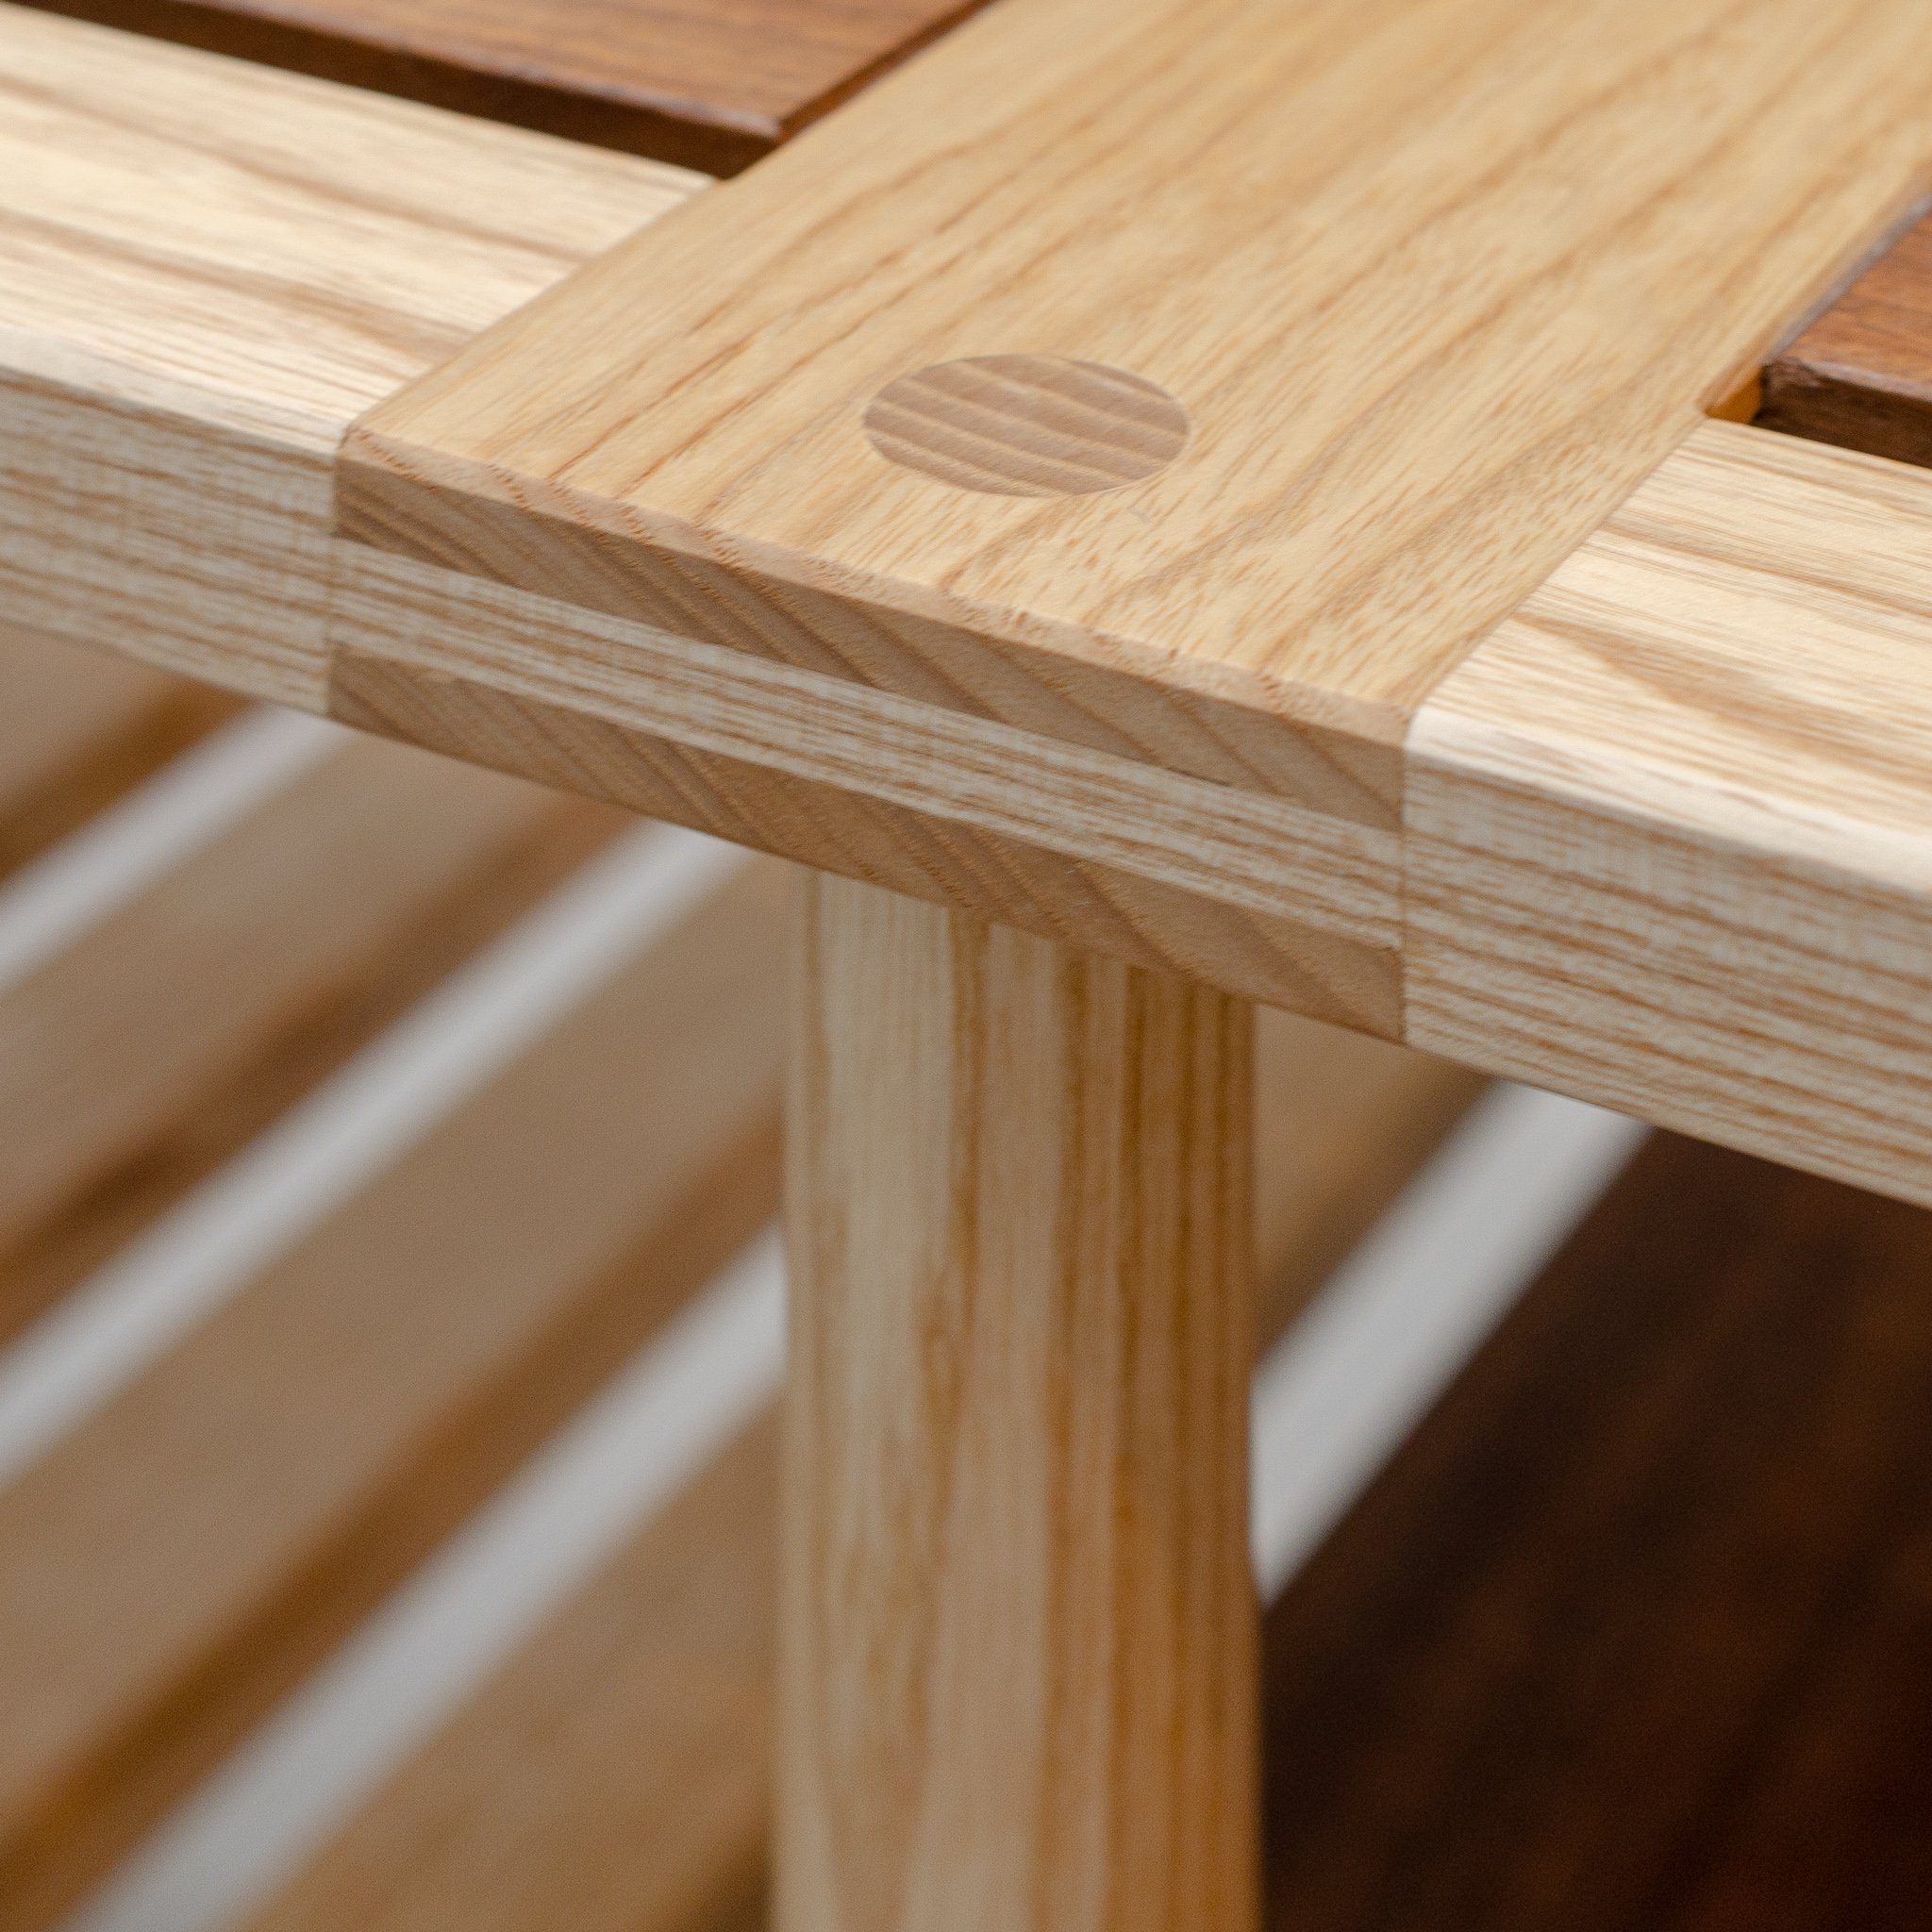 knot-ash-bench-joinery-detail.jpg